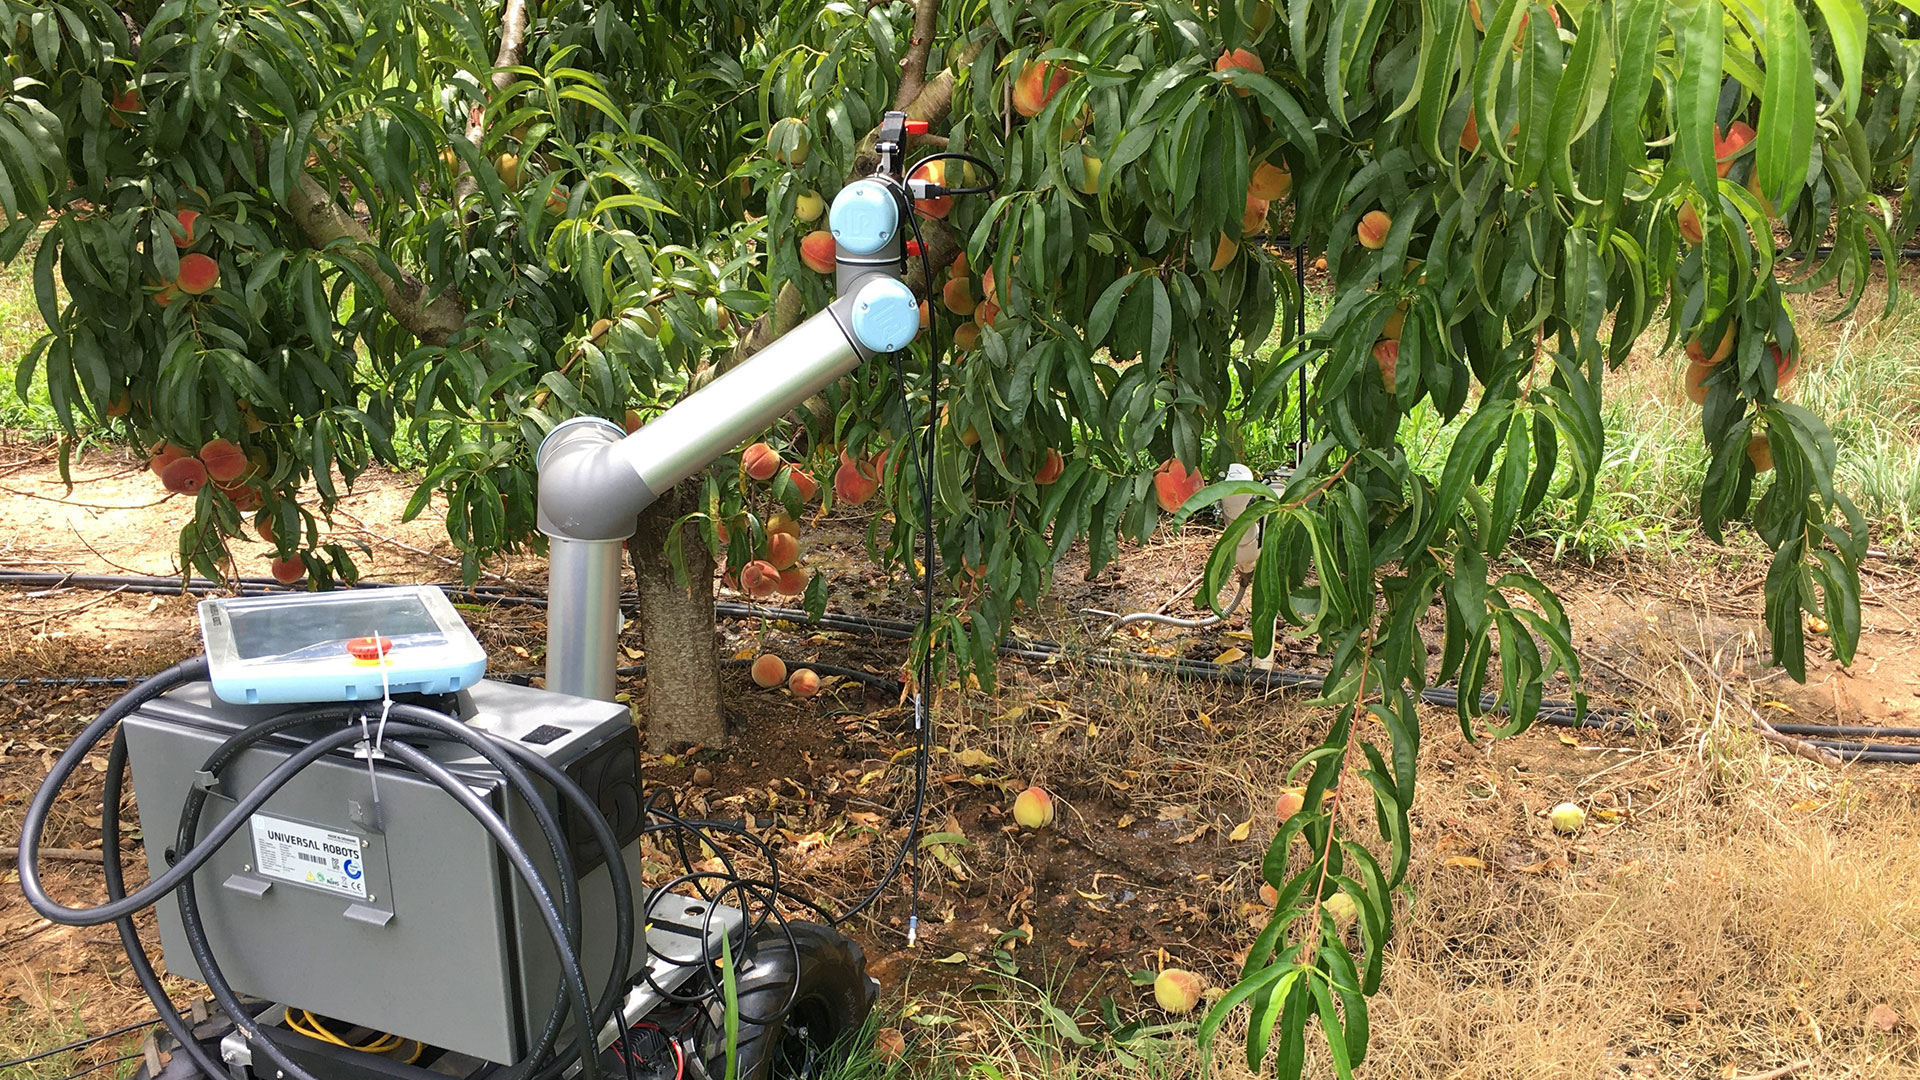 Peach robot raises articulated arm to select peach on tree.